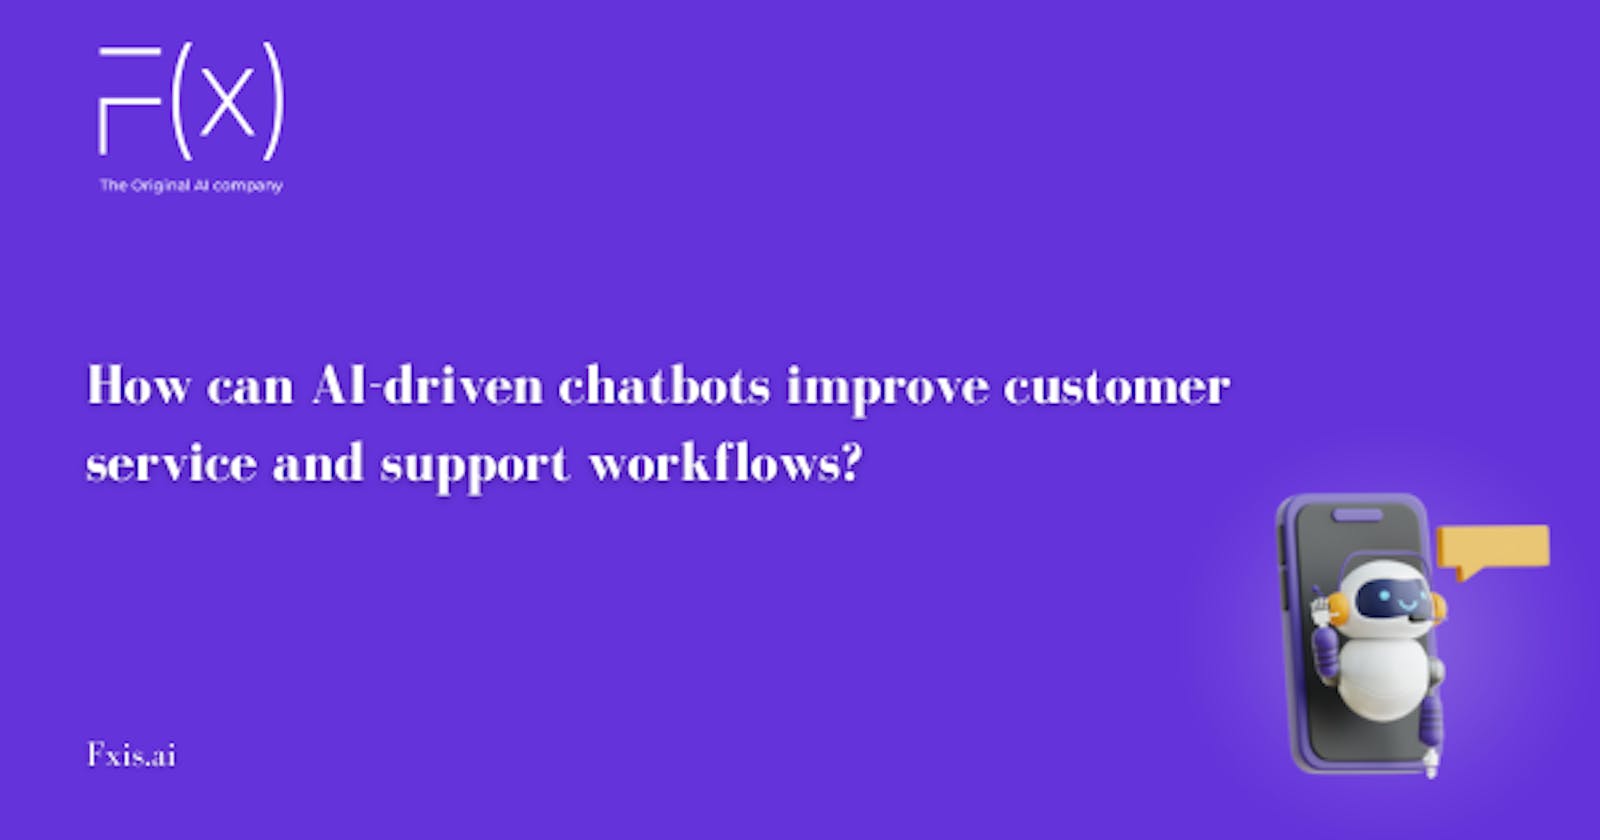 How can AI-driven chatbots improve customer service and support workflows?